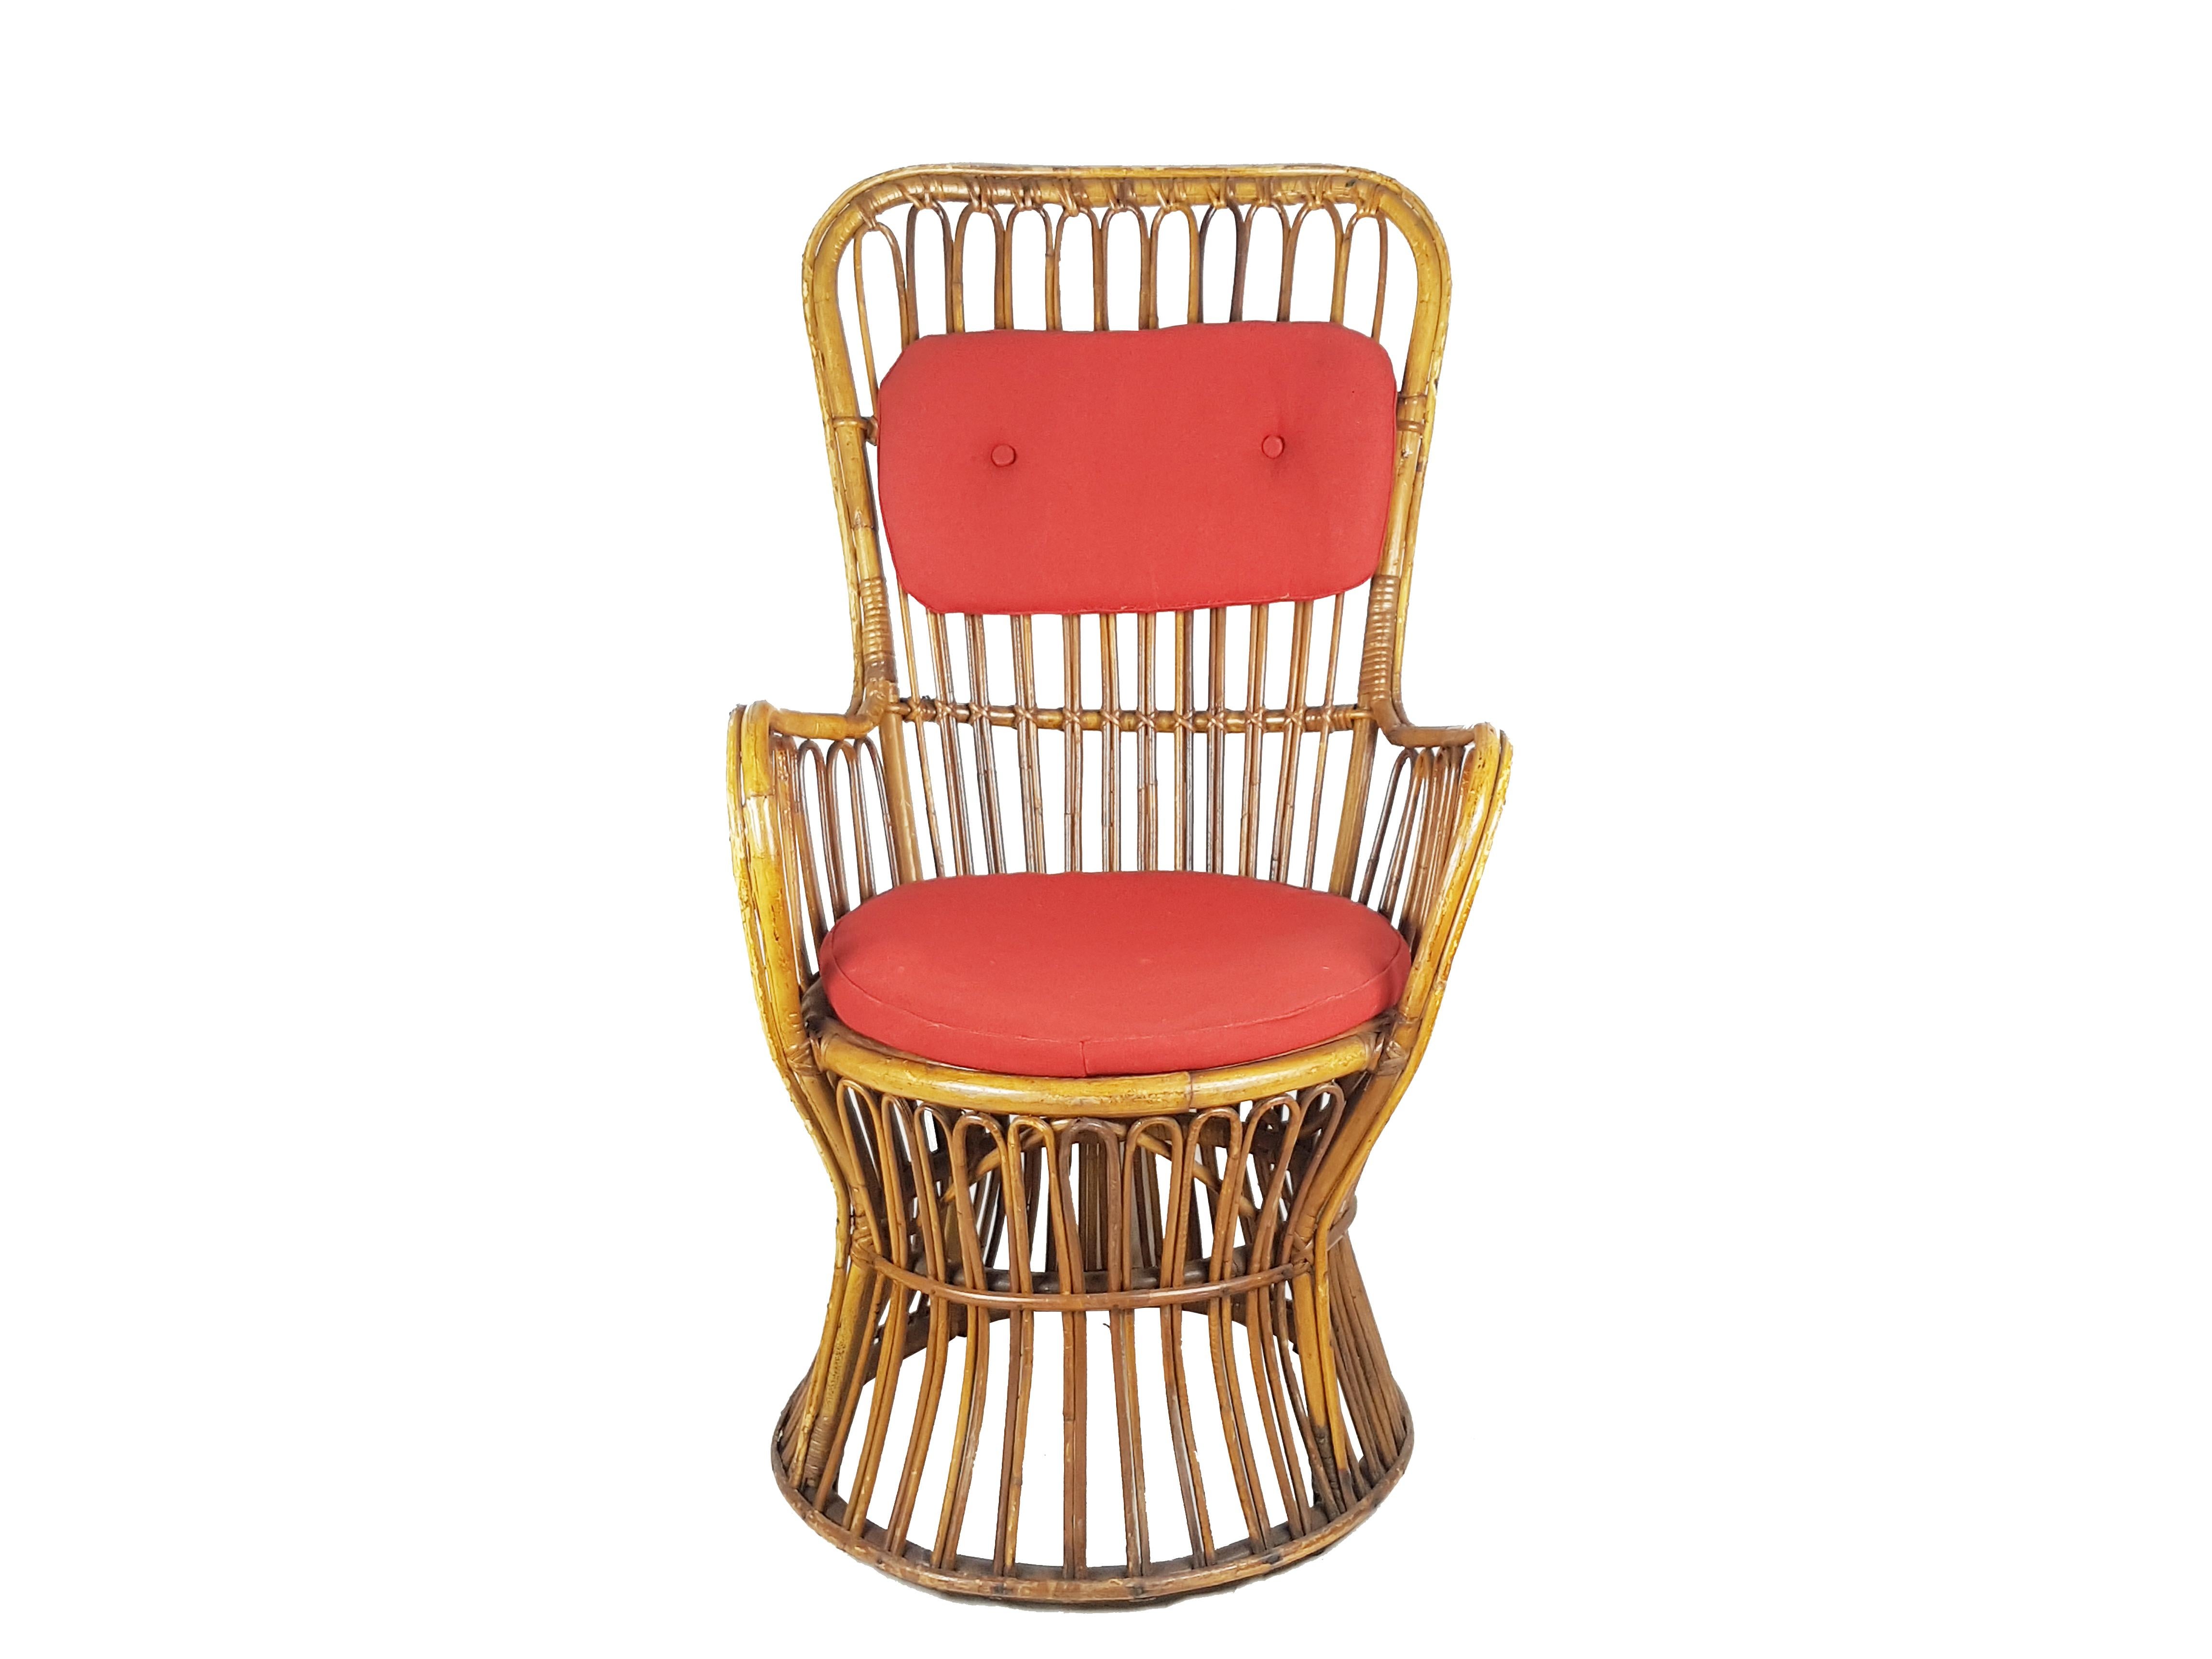 Italian Rattan & Red Wool Seat High Back Midcentury Armchairs, Set of 2 For Sale 2